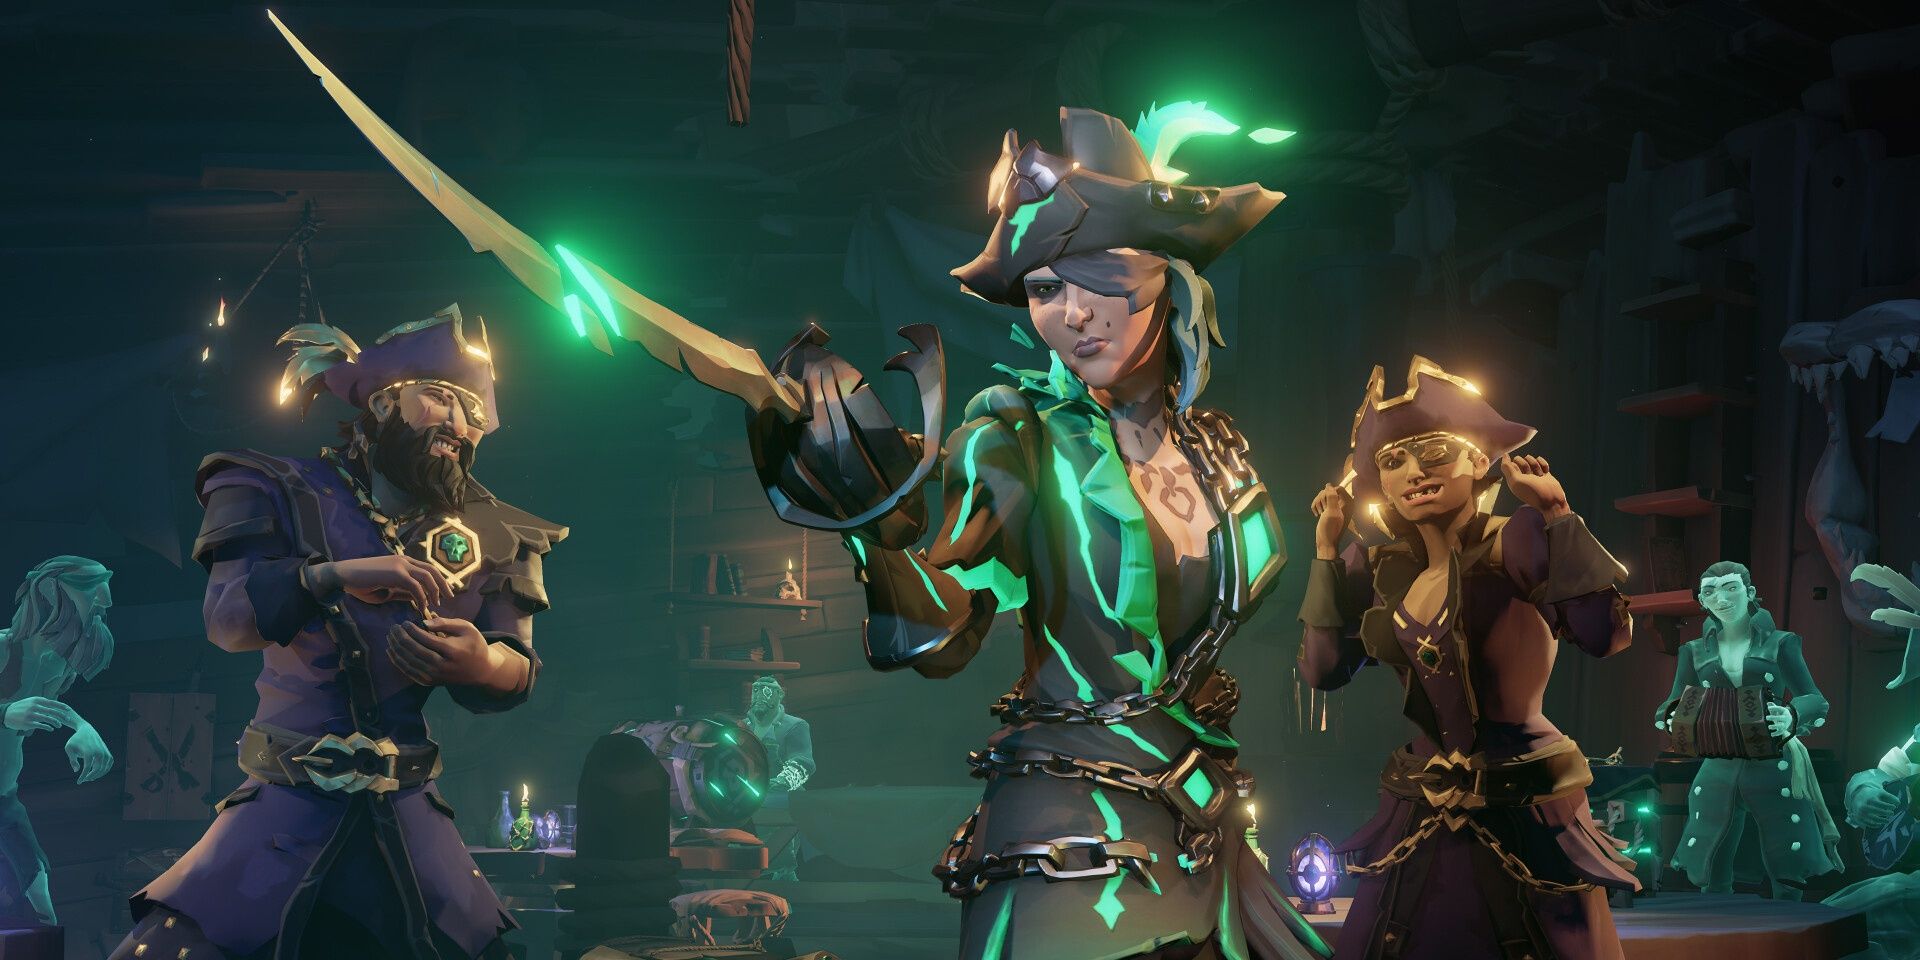 A pirate wearing glowing Pirate Legend gear as two pirates look on from behind them in Sea of Thieves